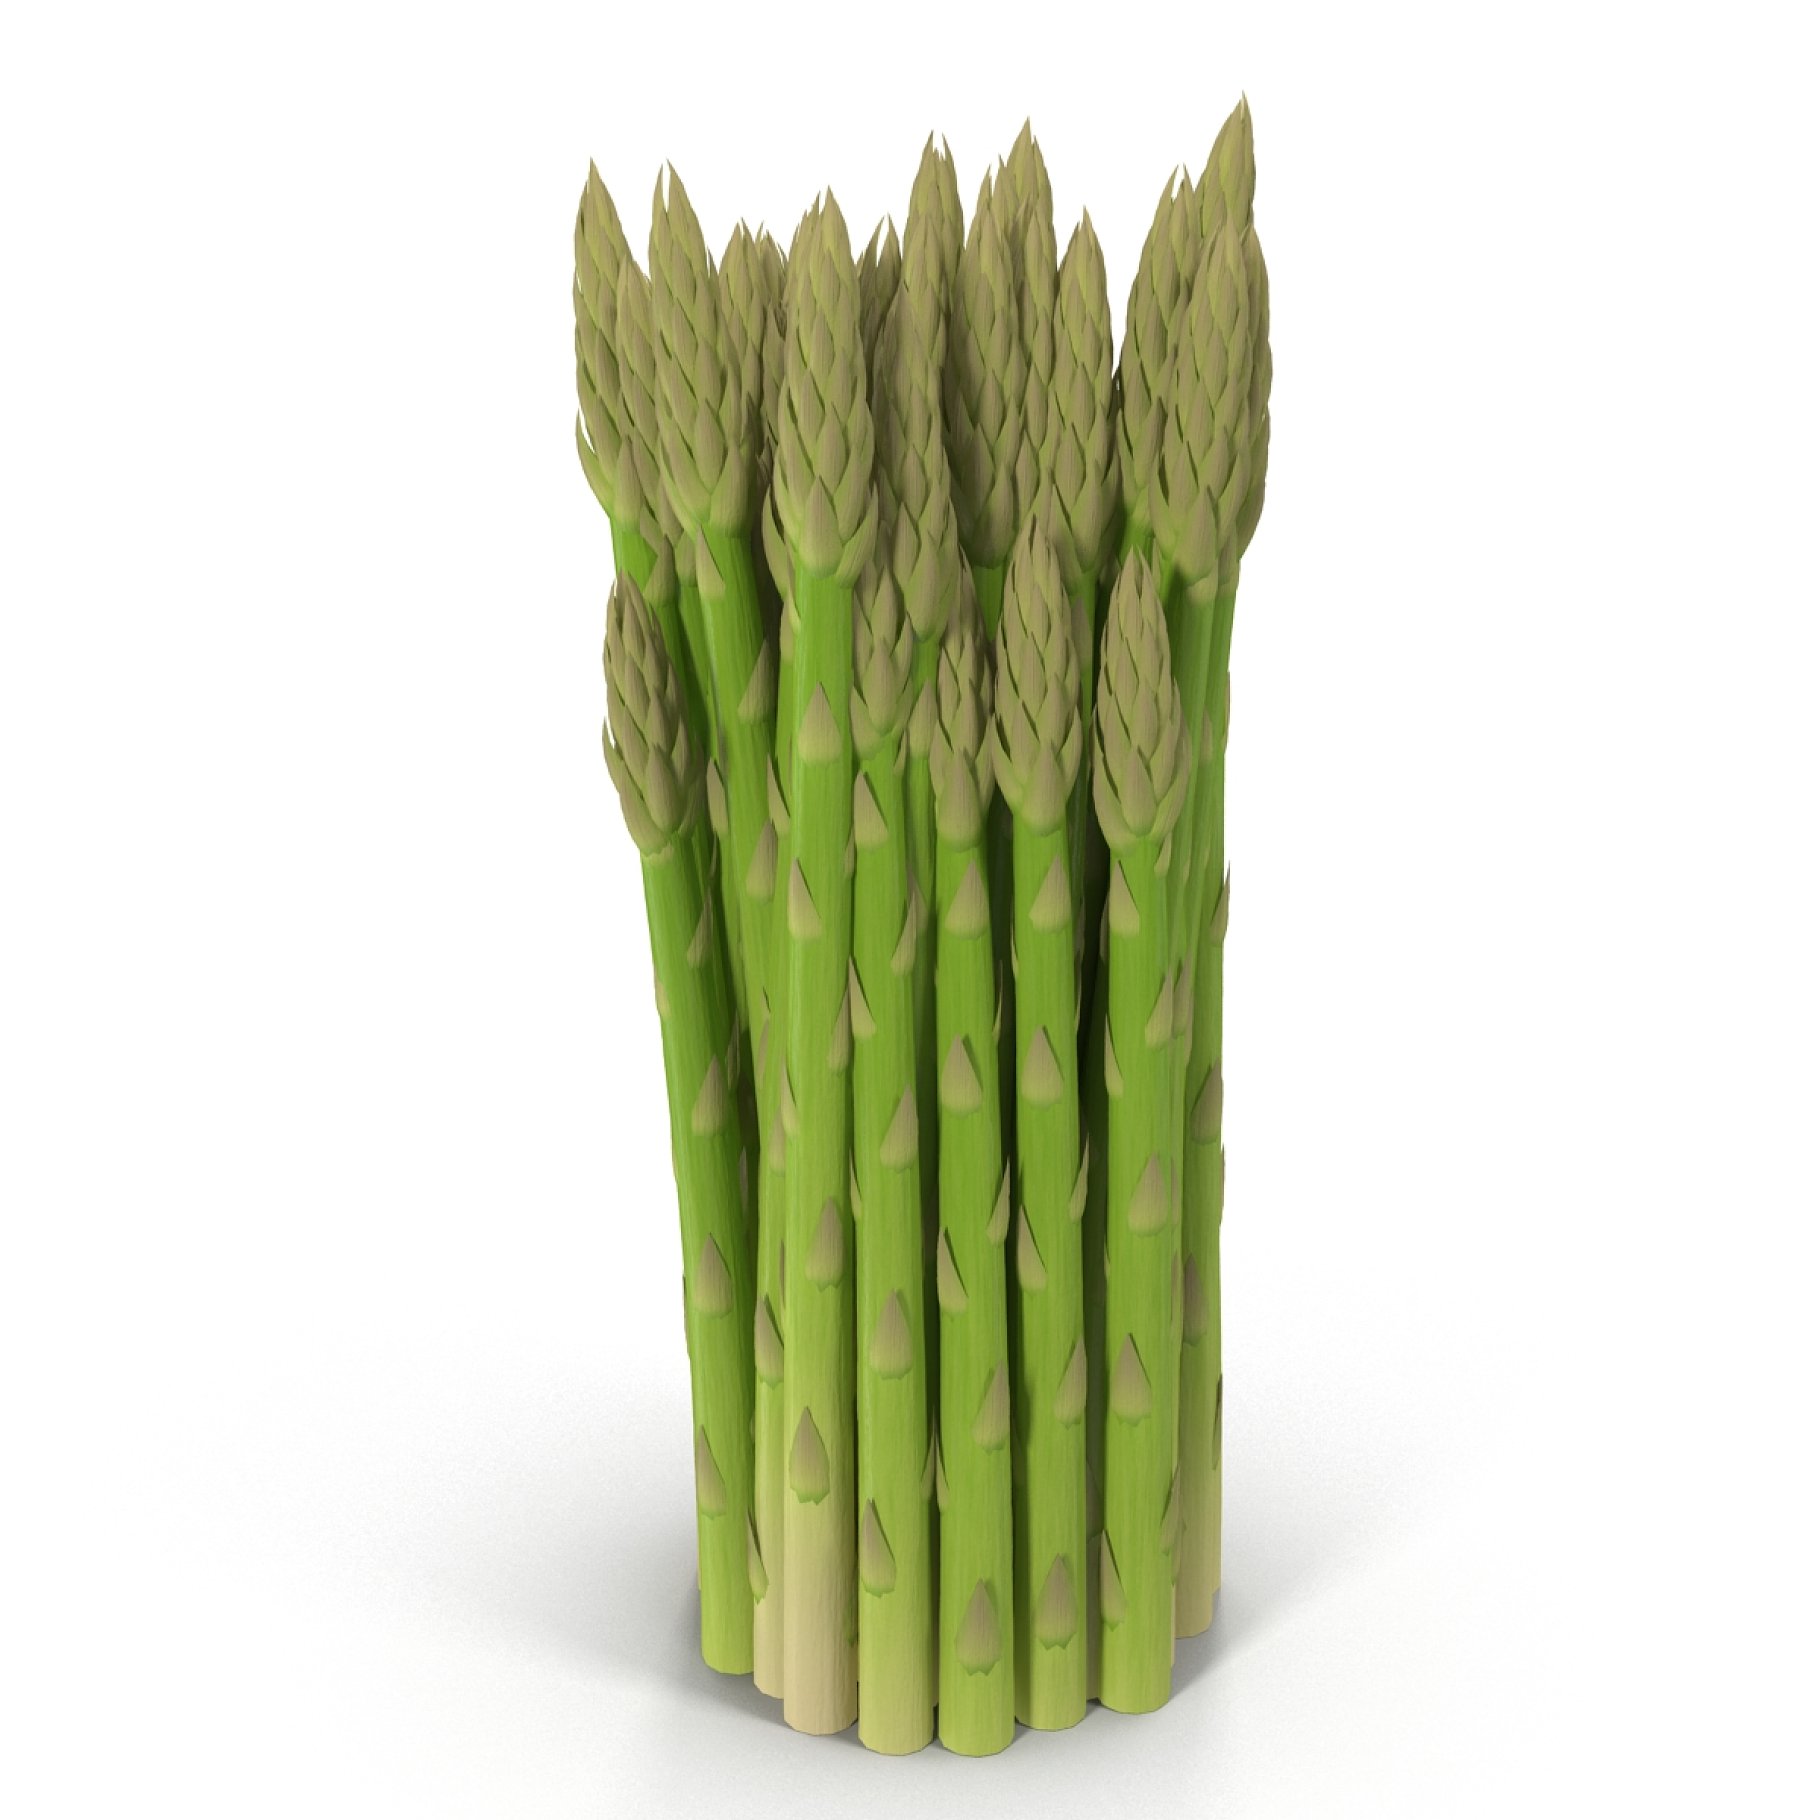 Different types of asparagus and others.